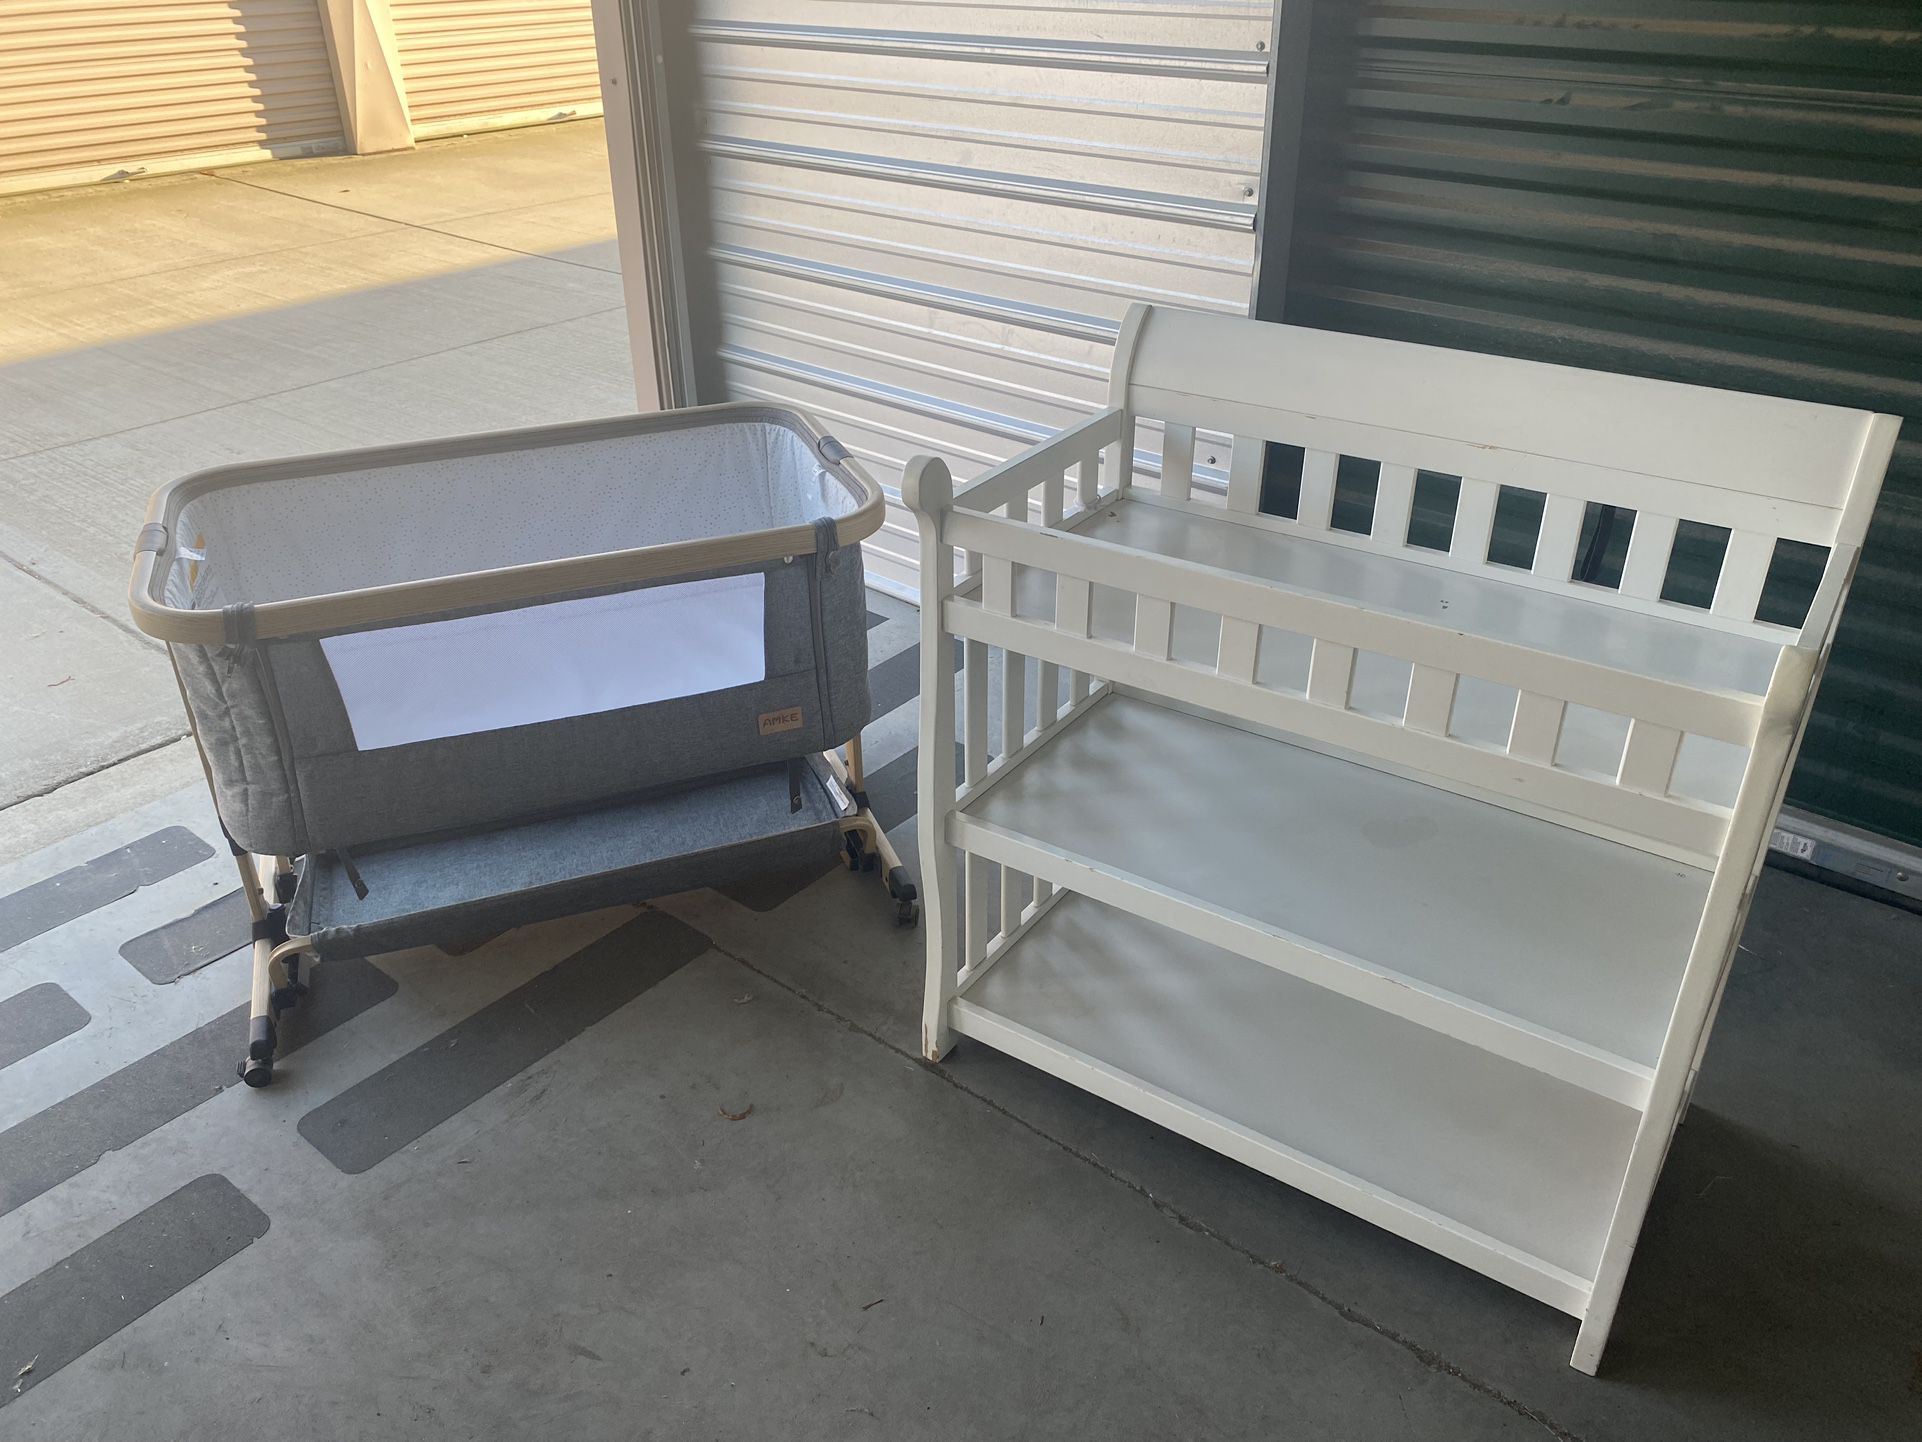 Amke Baby Bassinet & Changing Table 